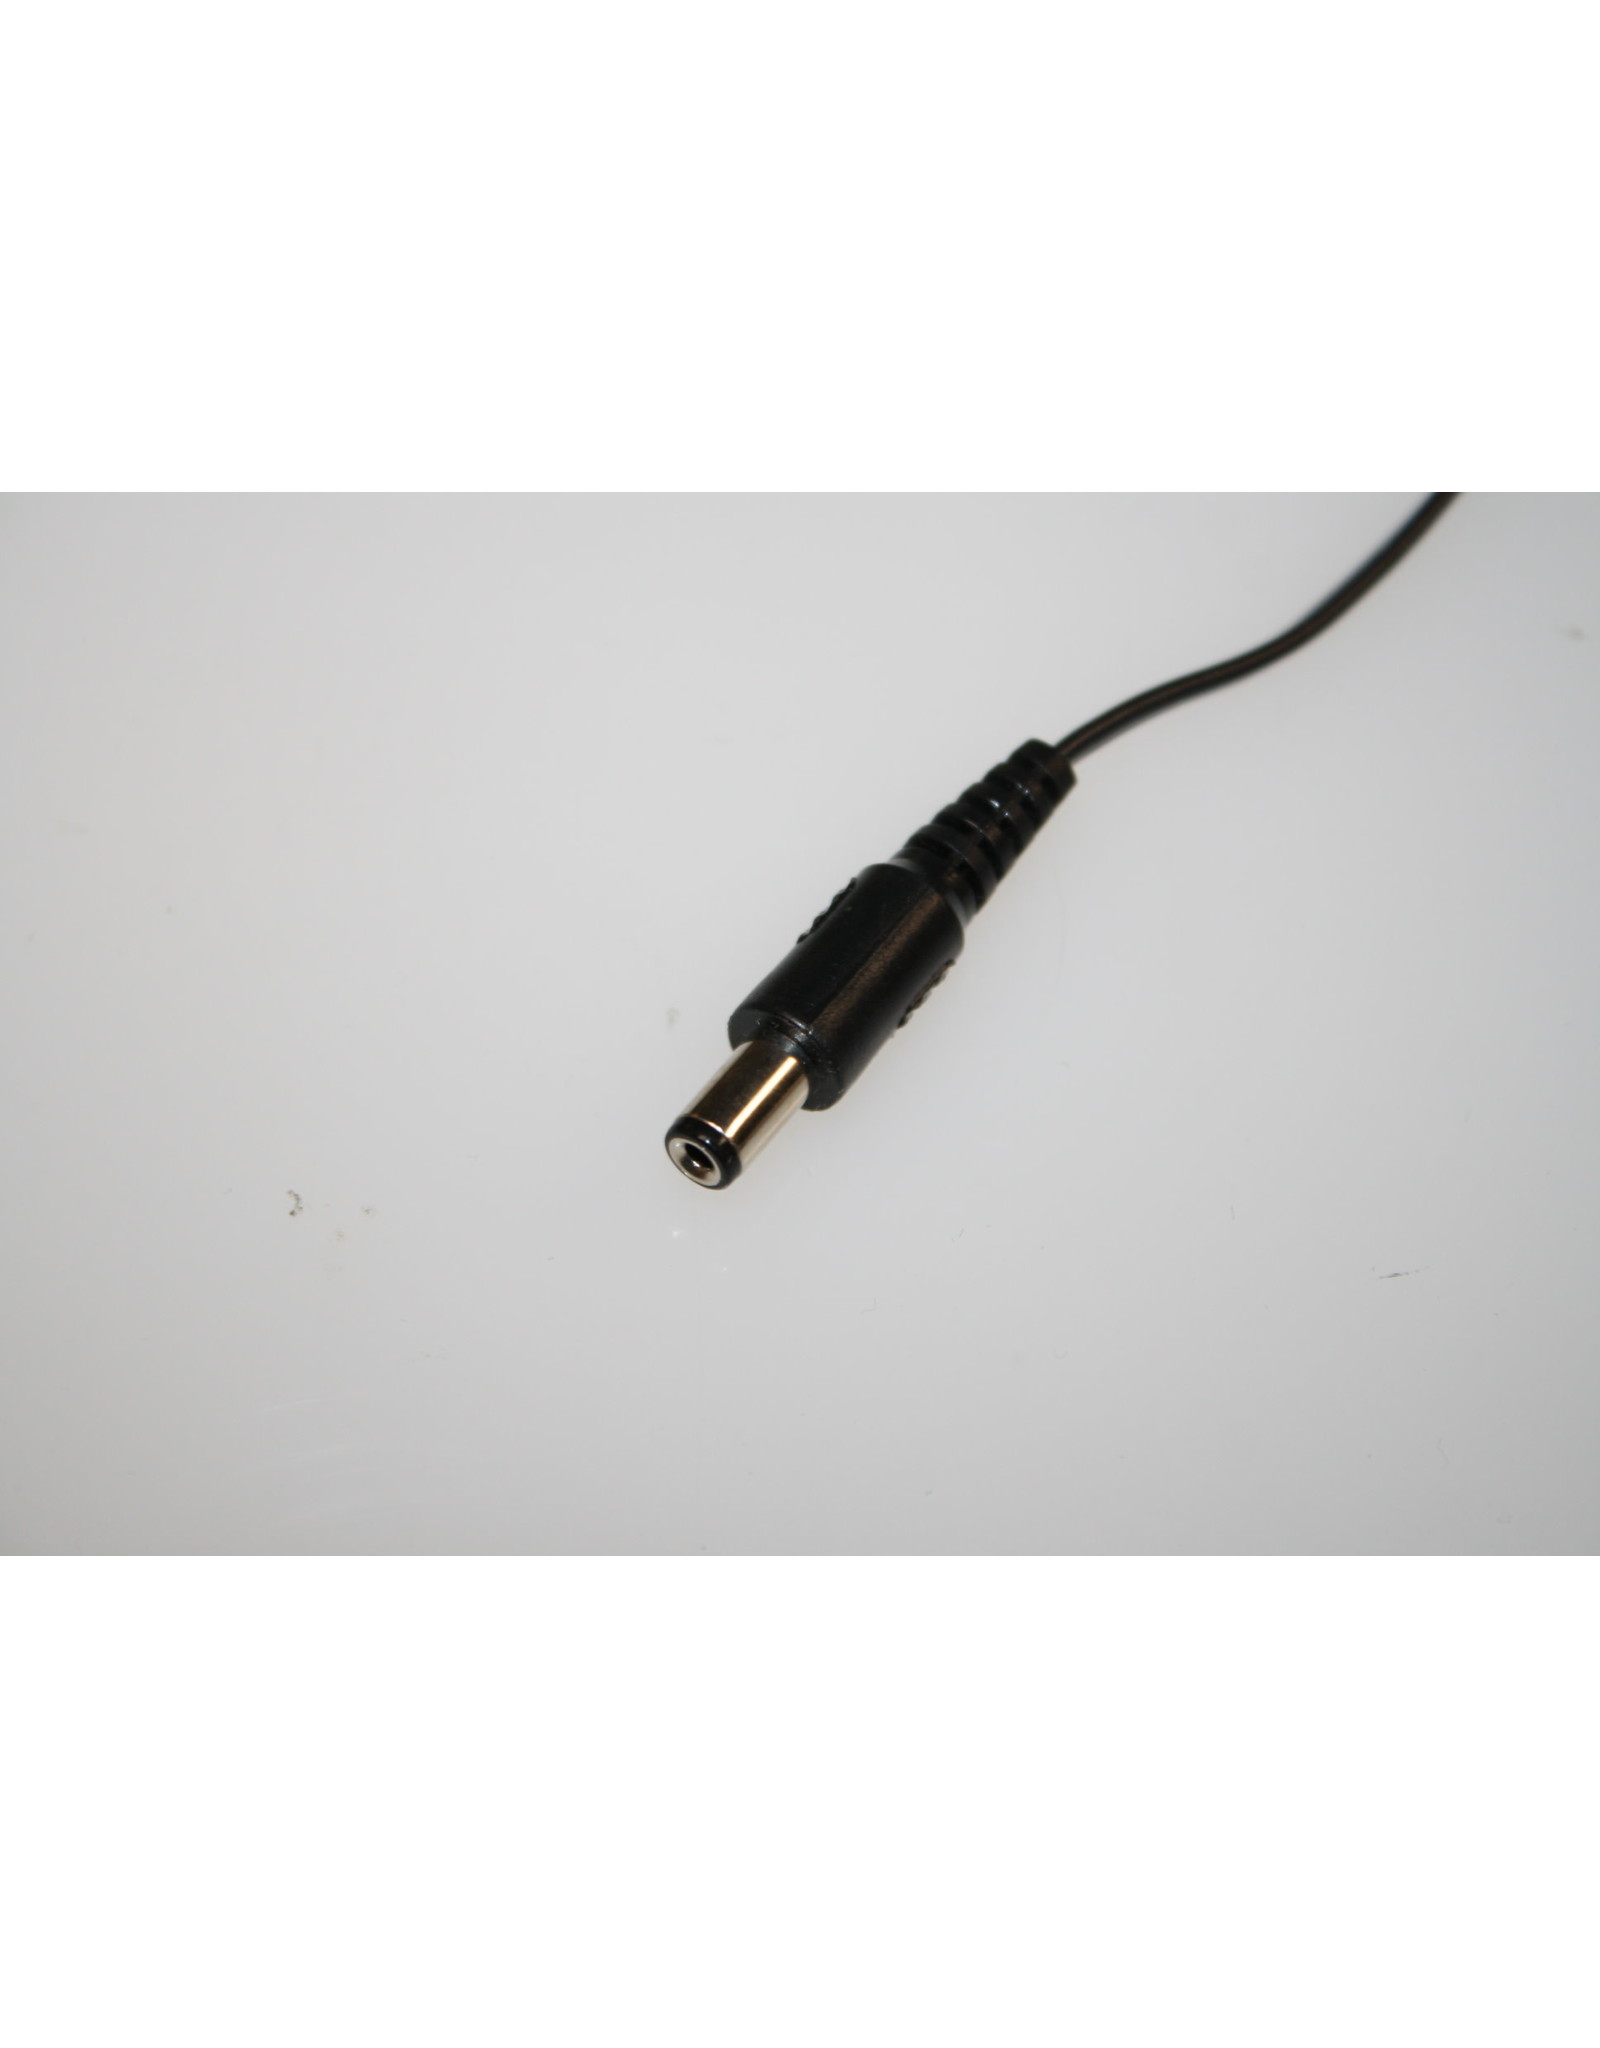 DC Alligator Clip to 2.1m Cable